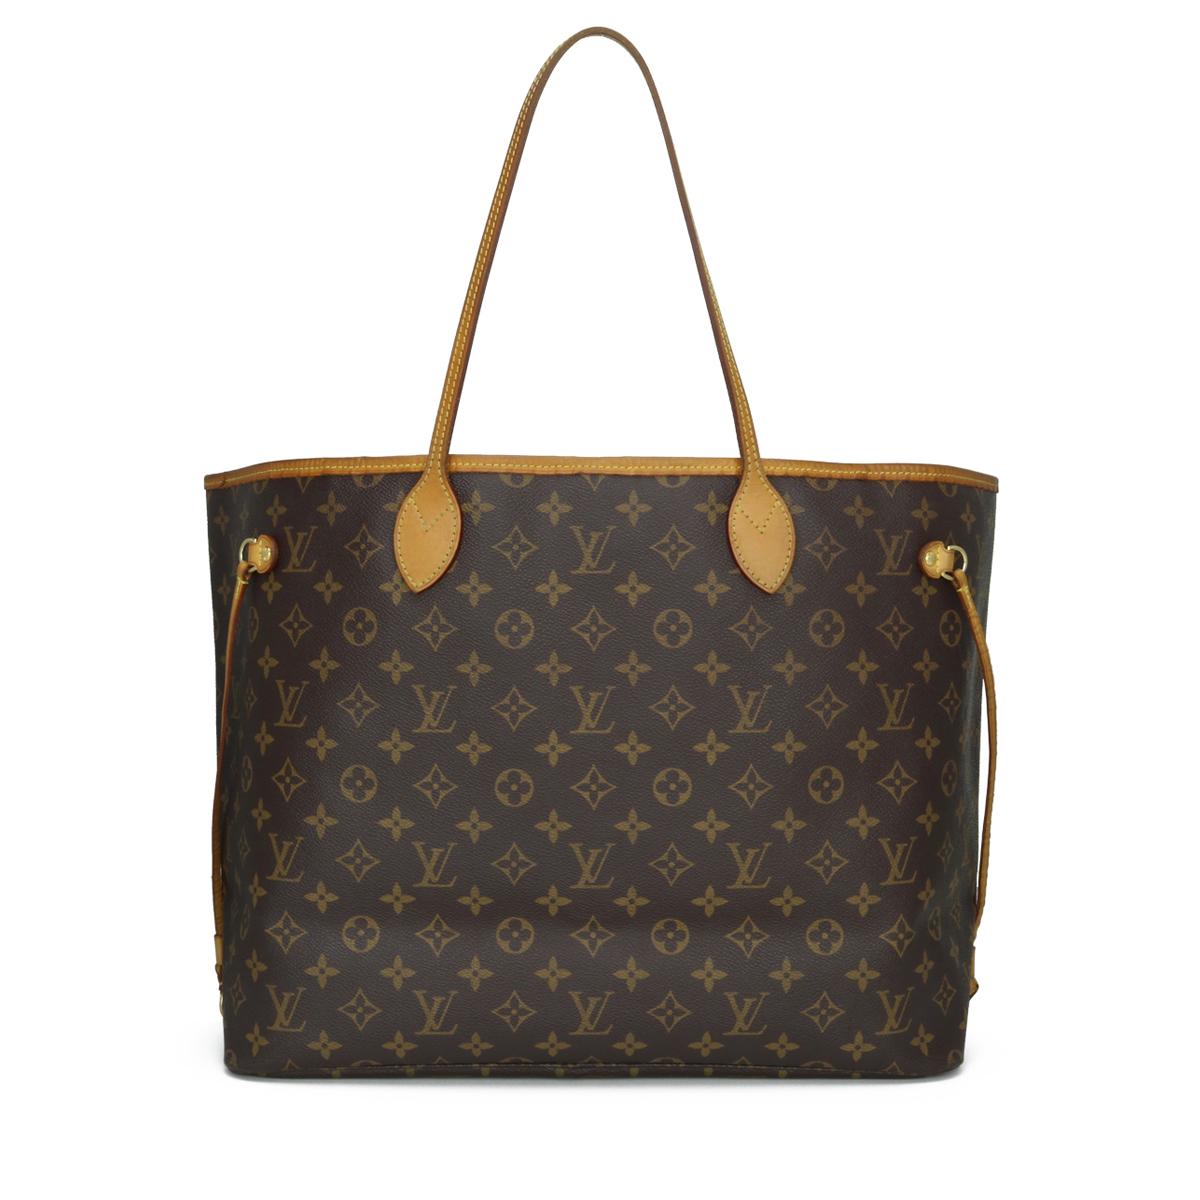 Louis Vuitton Neverfull GM in Monogram with Beige Interior 2007.

This bag is in good condition. 

- Exterior Condition: Good condition. Light storage creases to the canvas. Rubbing to four base corners. General marking, darkening and leather wear